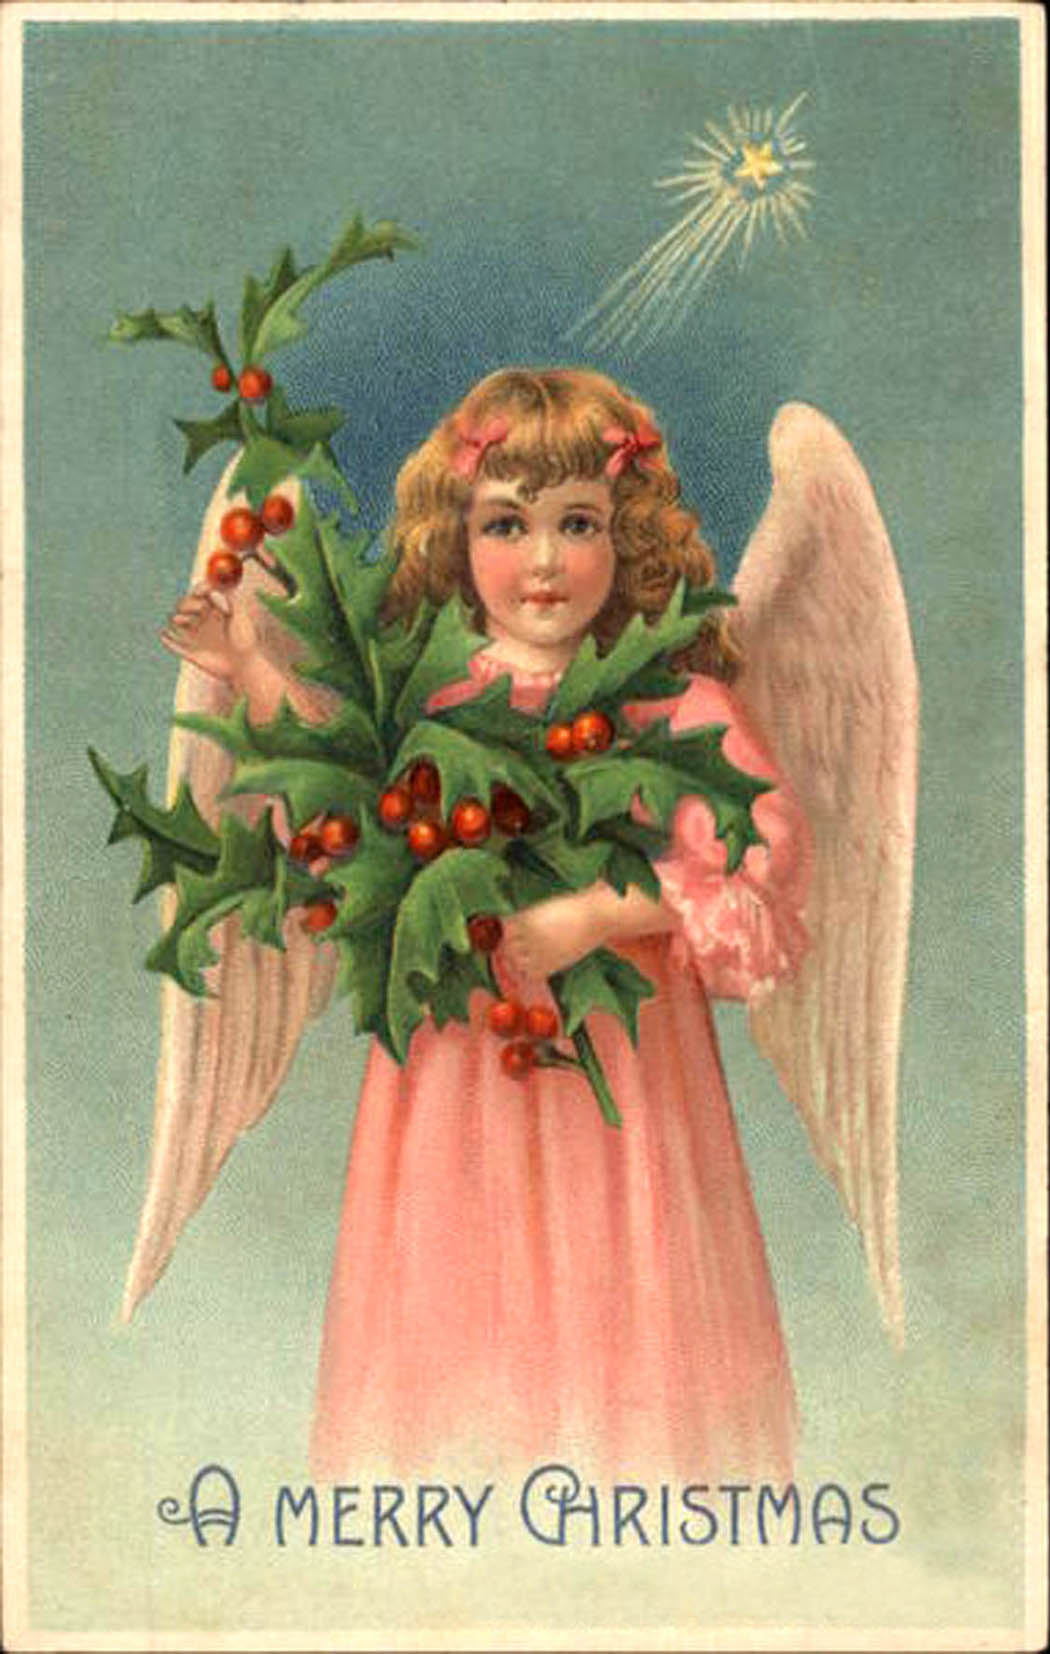 Free Printable Christmas Cards - From Antique Victorian to Modern Postcards